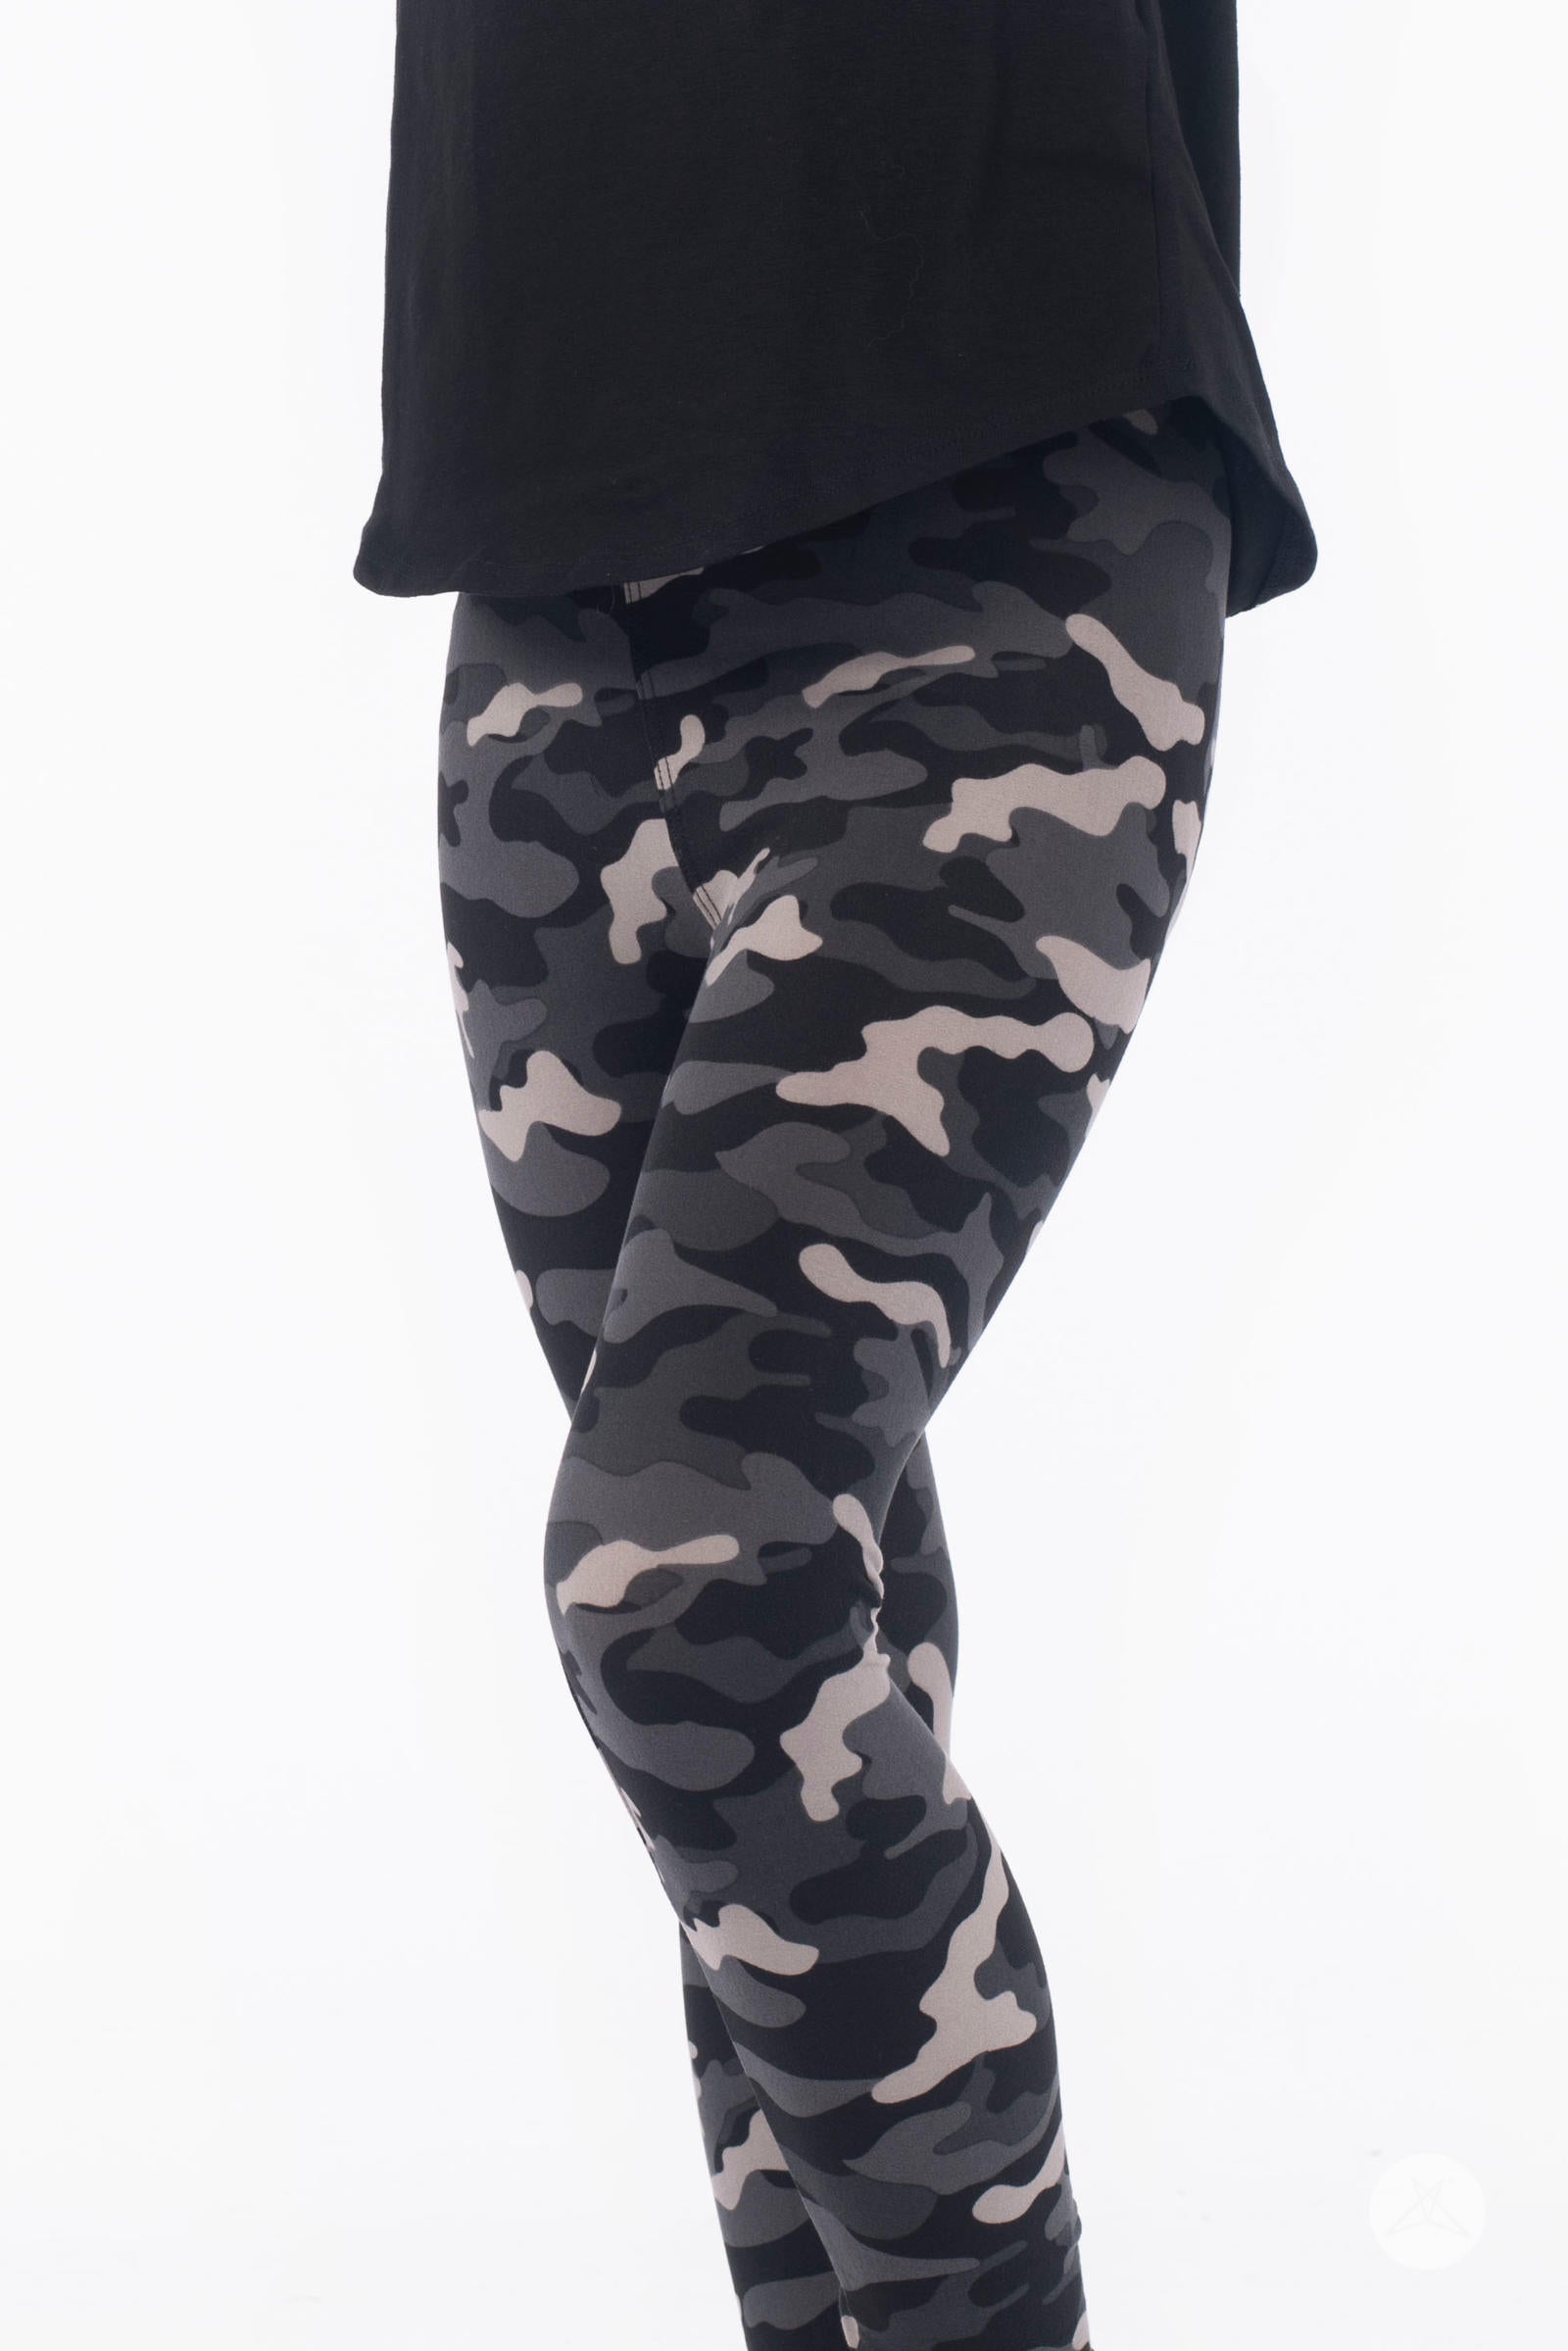 NEW Girls S/L Pink Camouflage Leggings, Kids School Yoga Pants, Pink Camo  Footless Tights, Mom and Me Leggings 